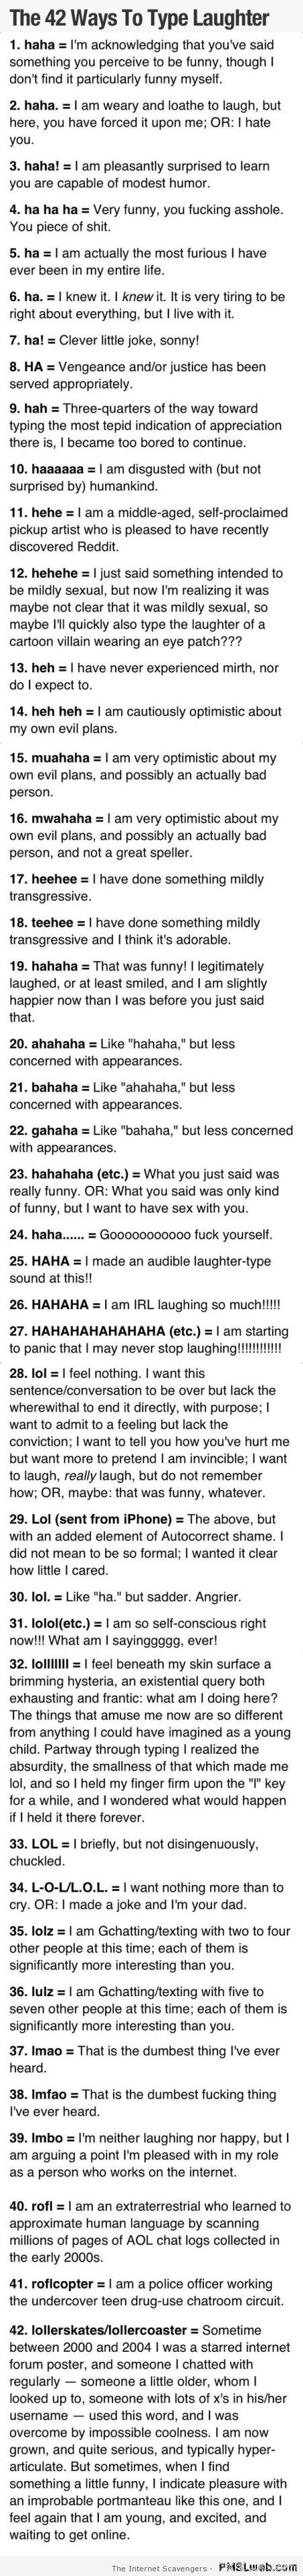 Different types of laughter online at PMSLweb.com